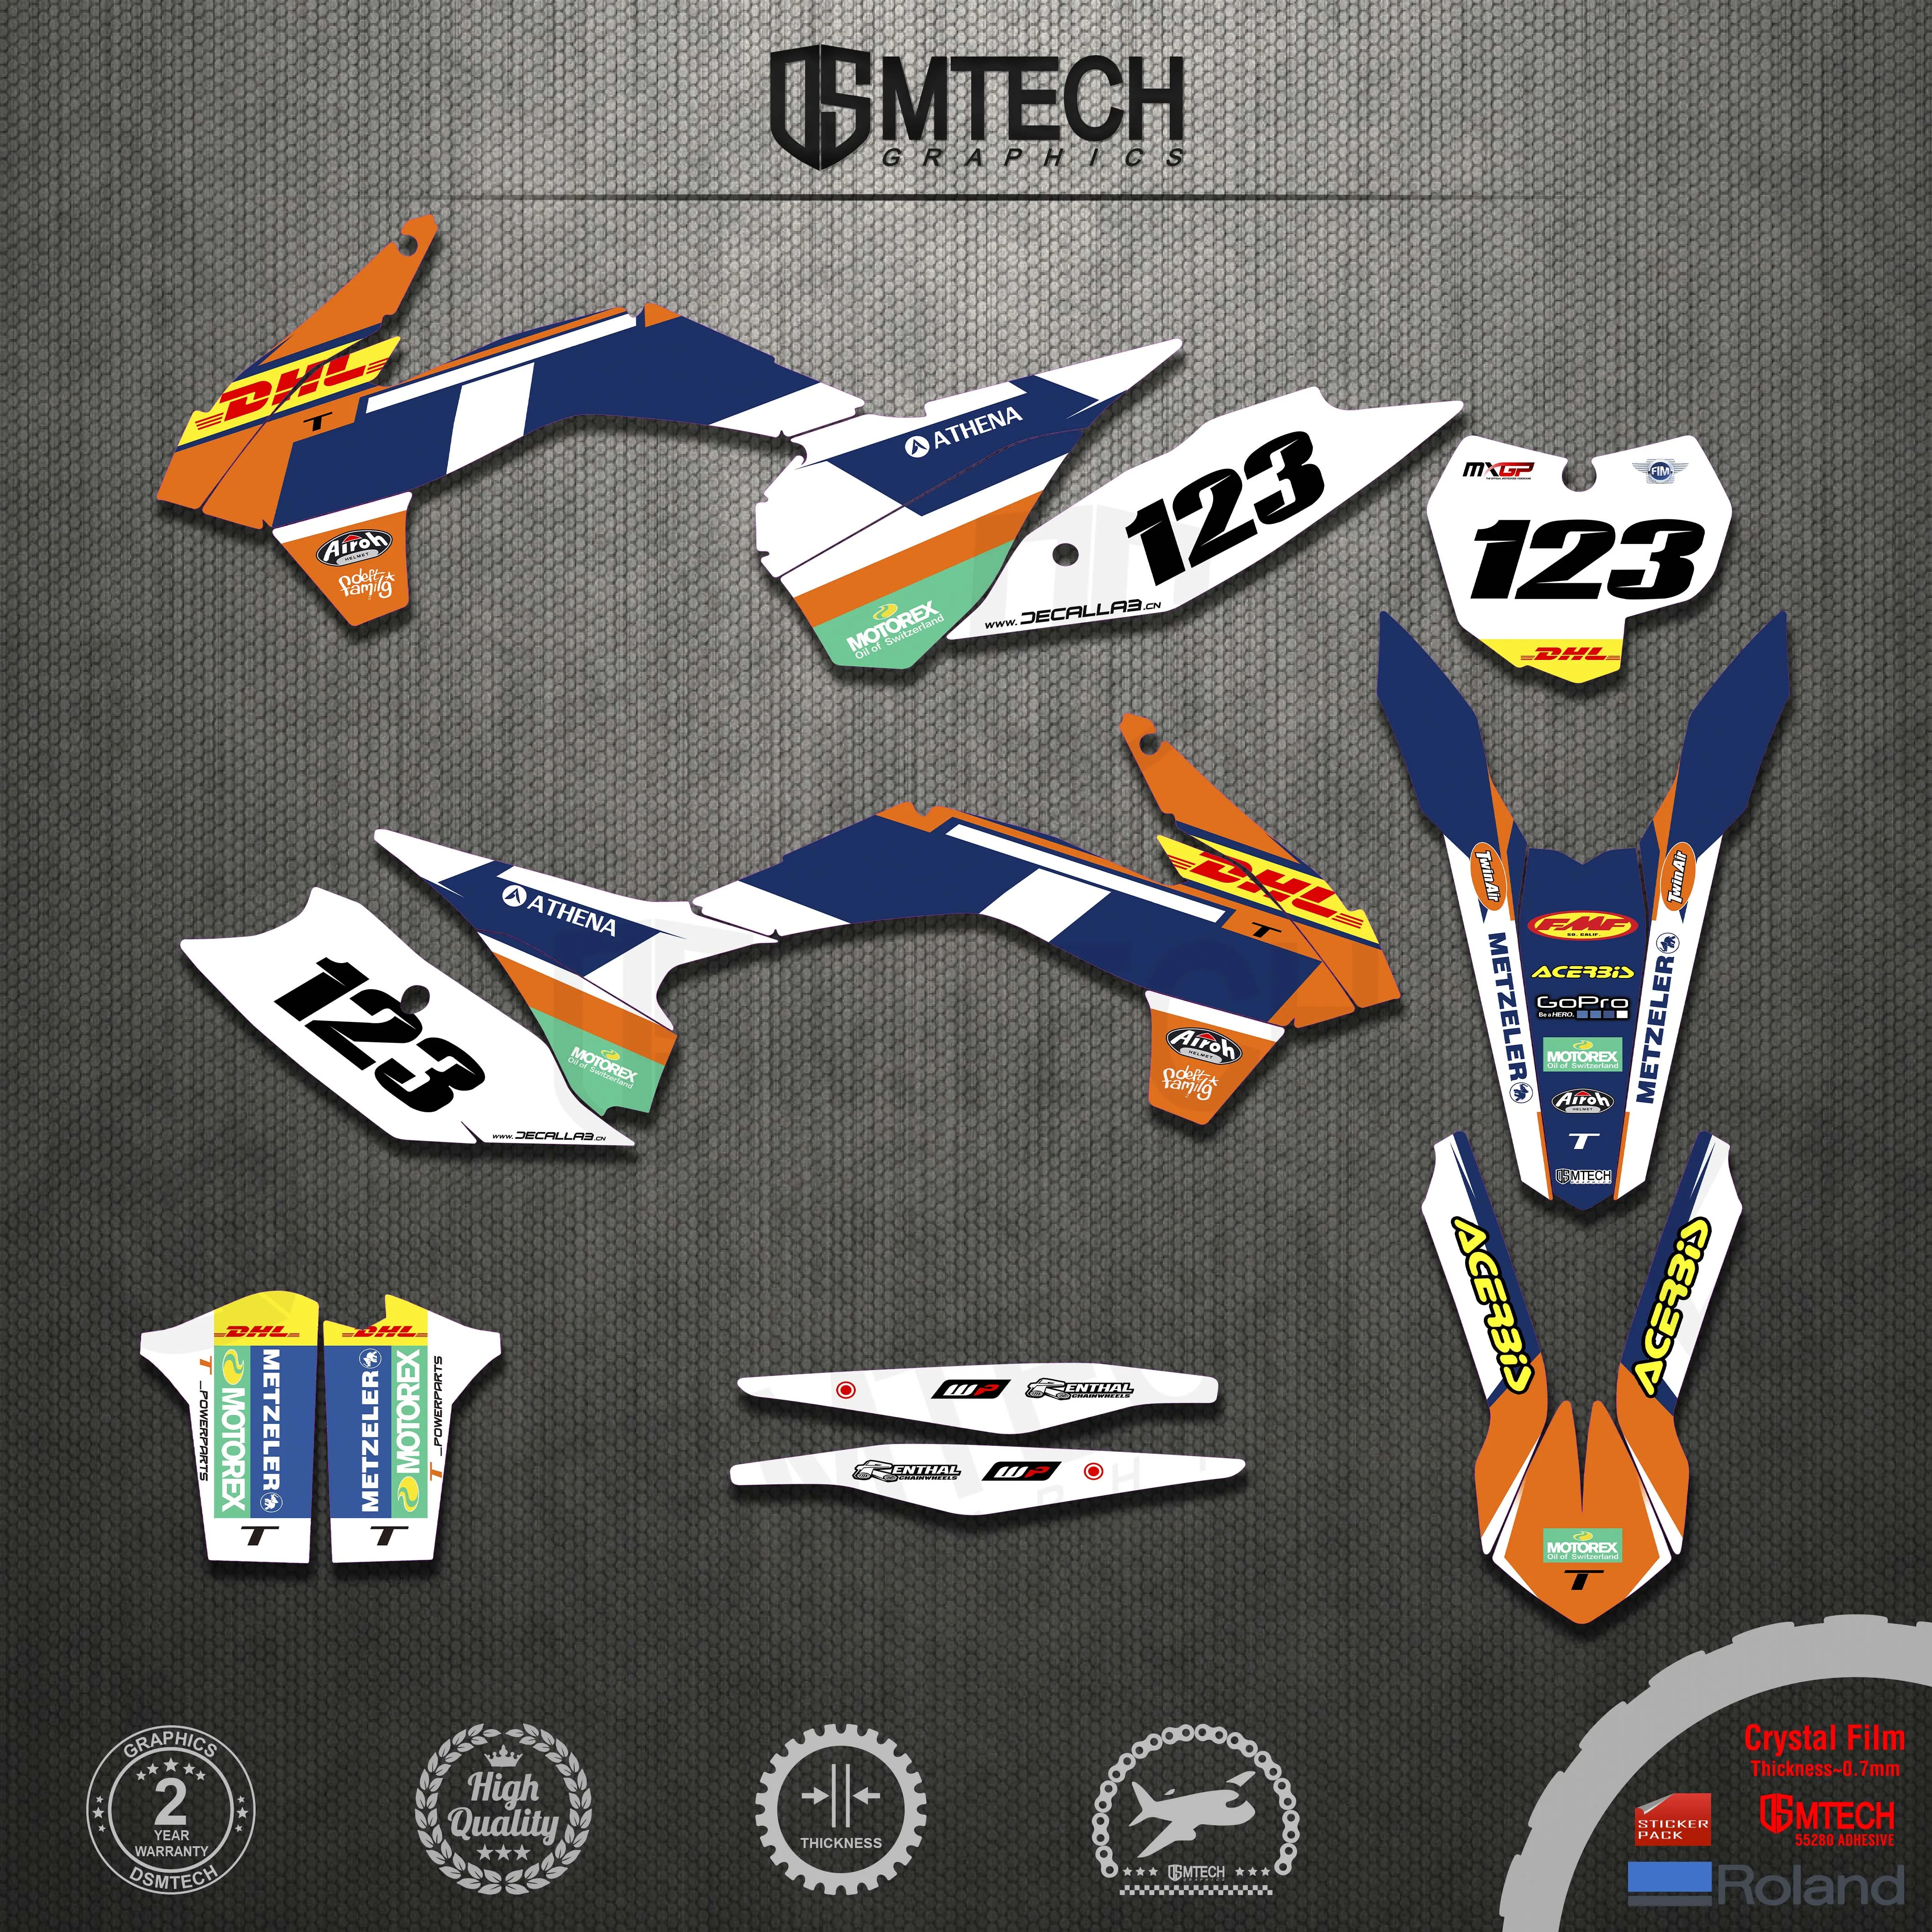 DSMTECH Custom Team Graphics Decal Sticker Kit Combo for KTM 2013 2014 2015 SX SXF , 2014 2015 2016 EXC XC-W EXC-F 001